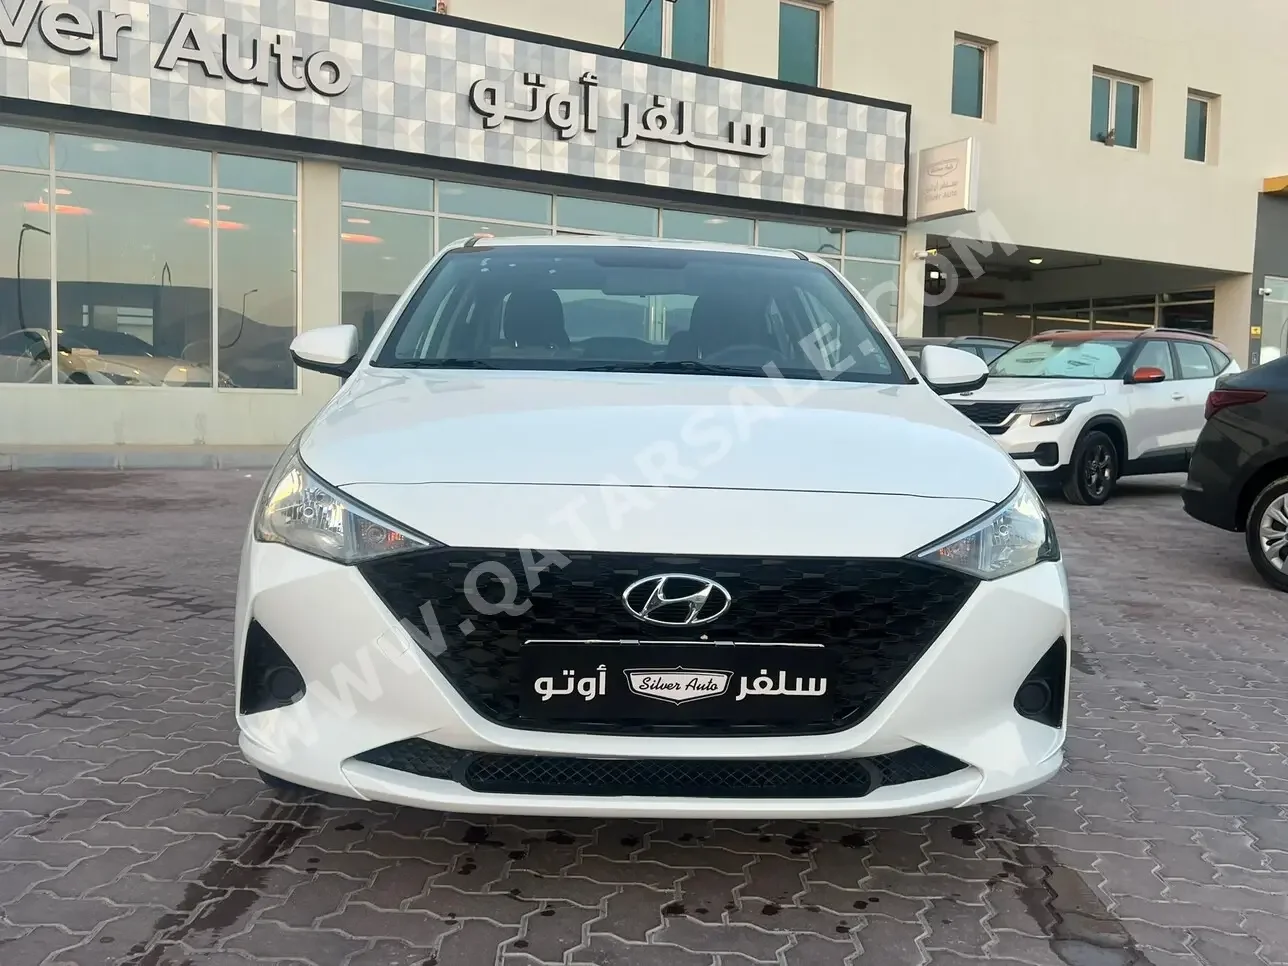 Hyundai  Accent  2021  Automatic  33,000 Km  4 Cylinder  Front Wheel Drive (FWD)  Sedan  White